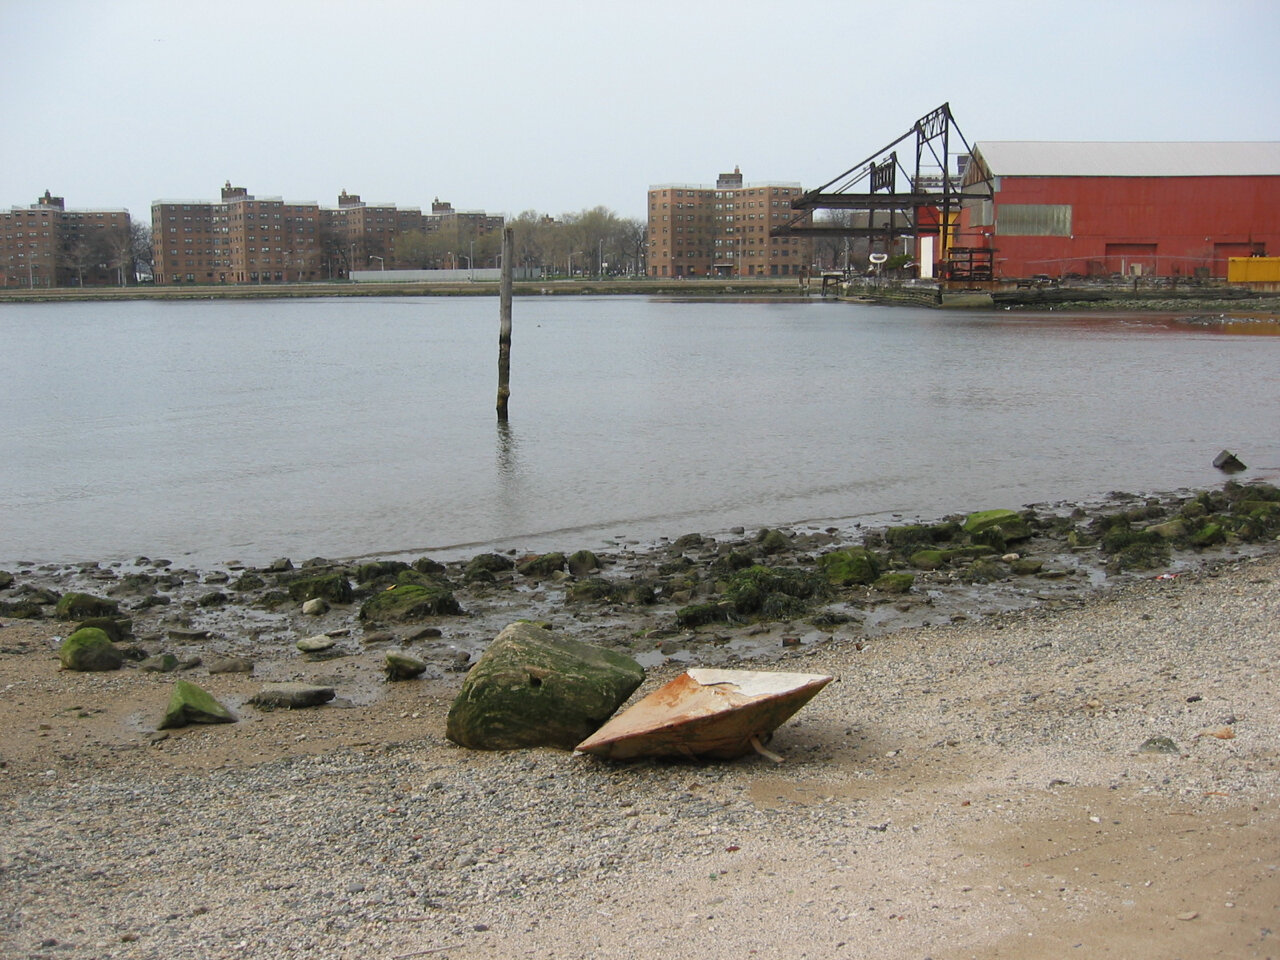   Flying saucer, 3:02pm, April 18, 2004. Near Socrates Sculpture Park, Long Island city. (We usually imagine aliens to be somewhat human-sized, but this proves differently.)  